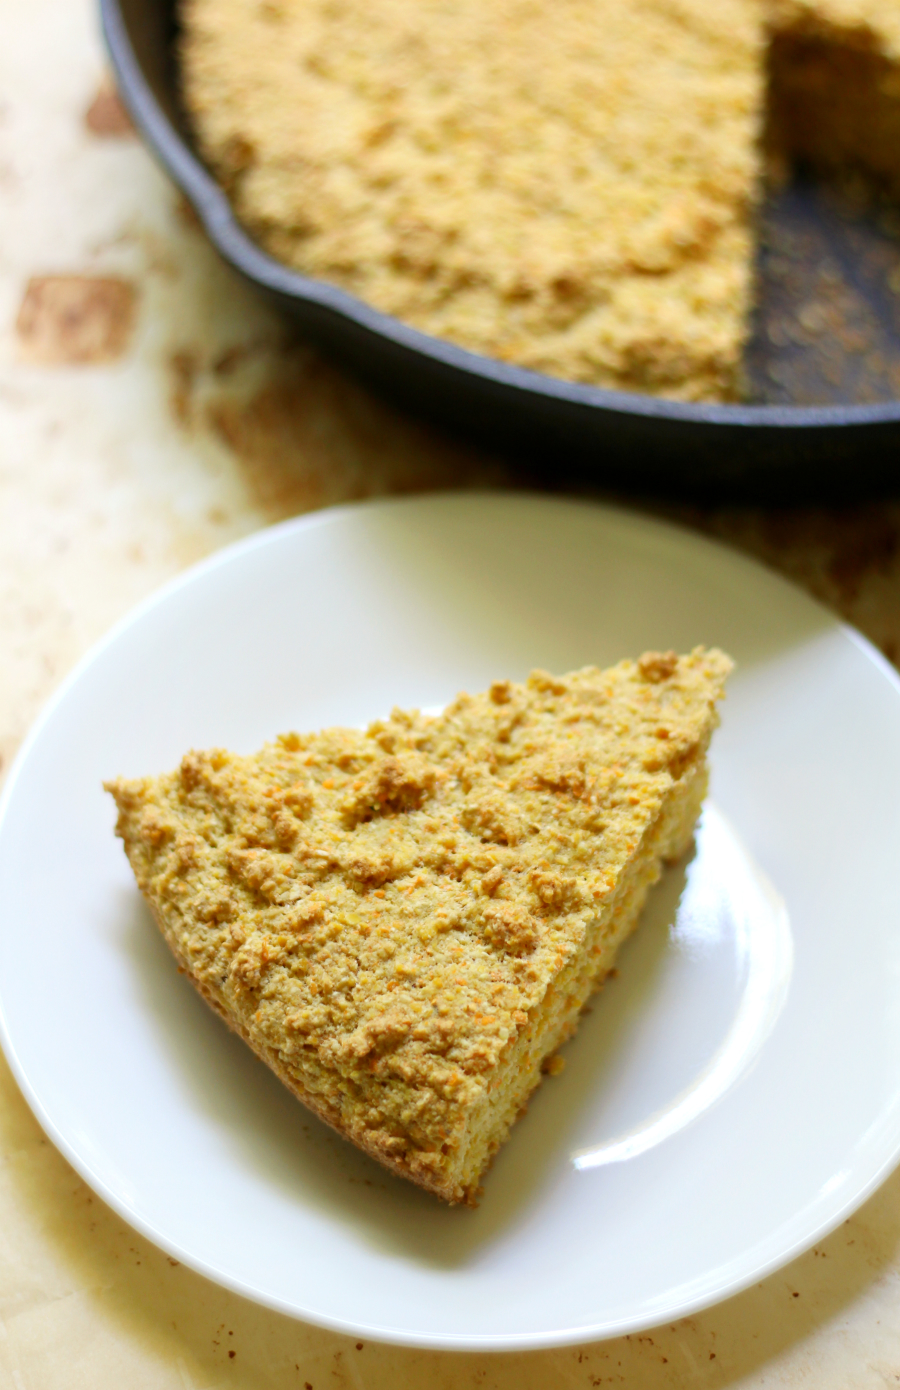 Rustic Gluten-Free Cornbread | Strength and Sunshine @RebeccaGF666 Enjoy the old-fashioned classic once again! Rustic Gluten-Free Cornbread that's vegan and top 8 allergy-free. Baked right in your grandma's seasoned cast iron skillet, this cornbread recipe will bring back all the comfort and good feels!